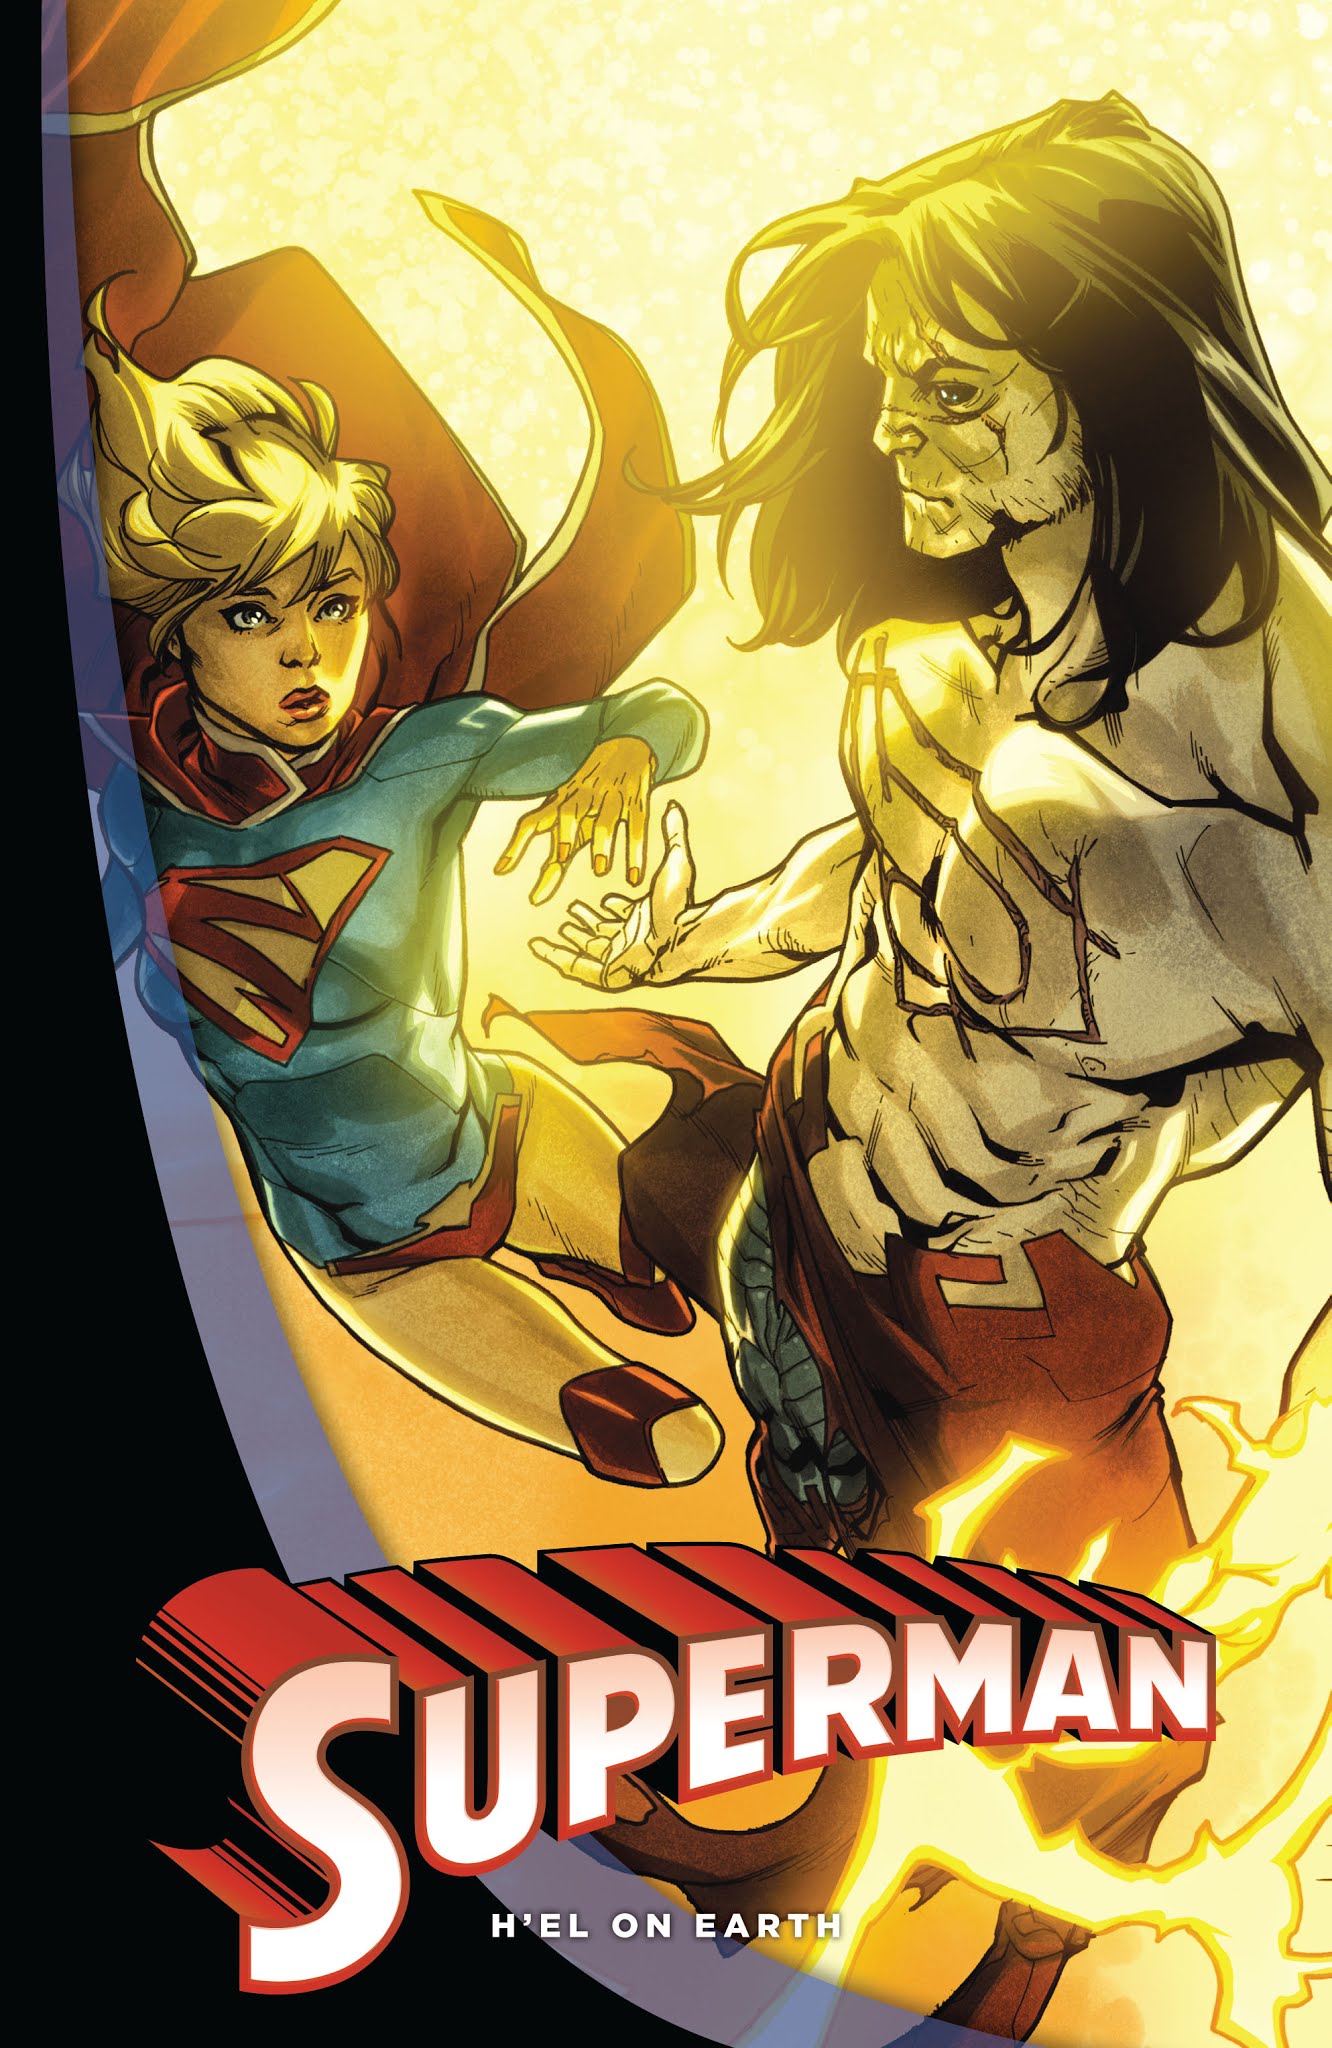 Read online Superman: H'el on Earth comic -  Issue # TPB (Part 1) - 2